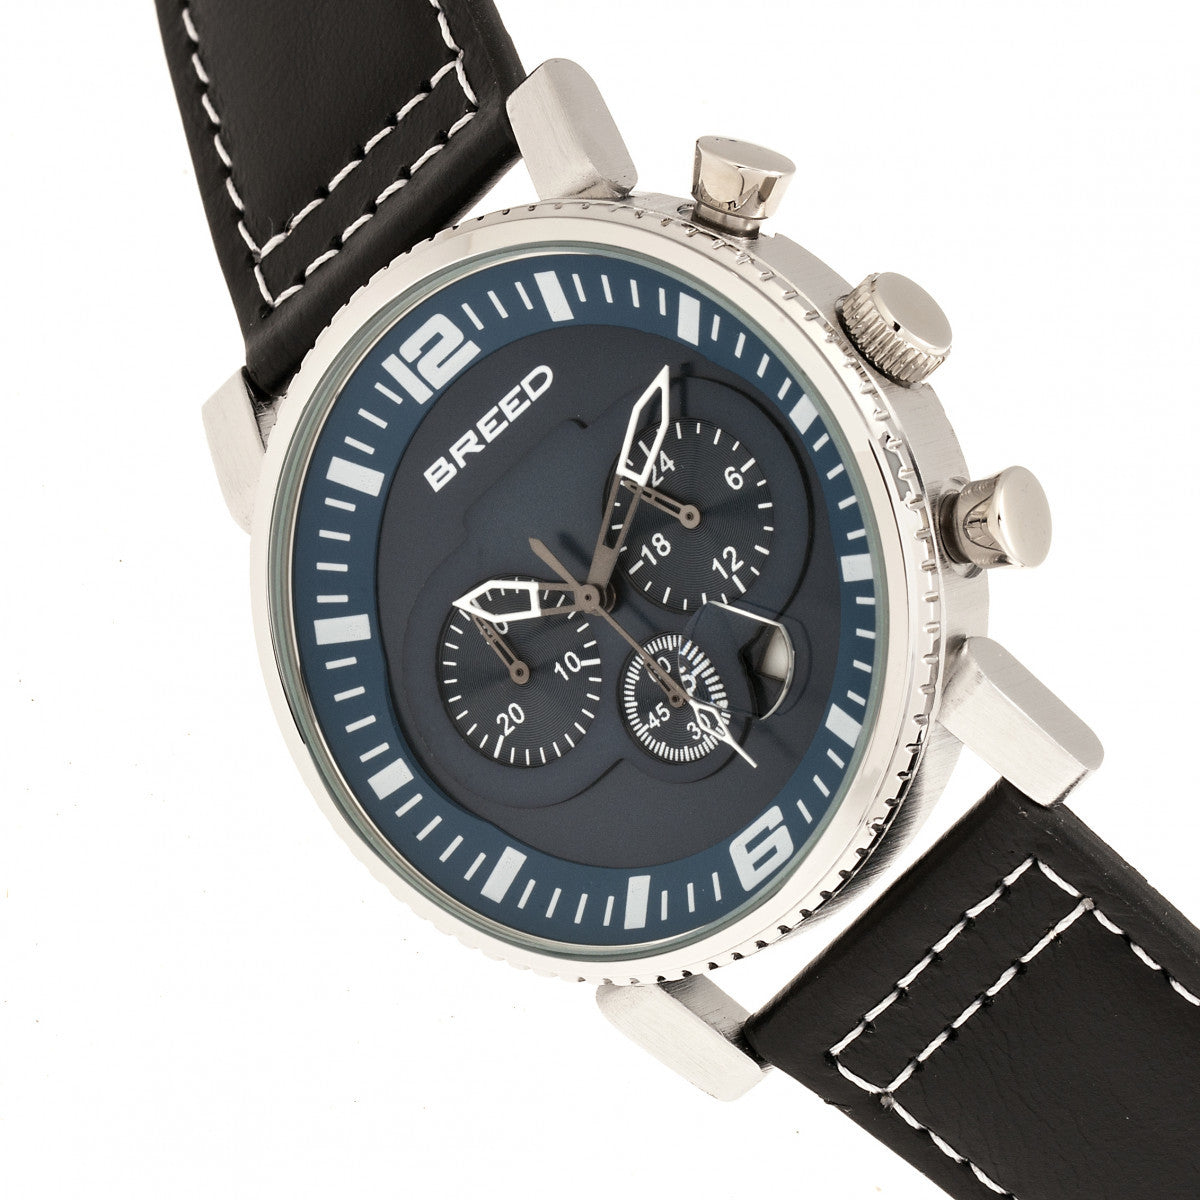 Breed Ryker Chronograph Leather-Band Watch w/Date - Black/Blue - BRD8203